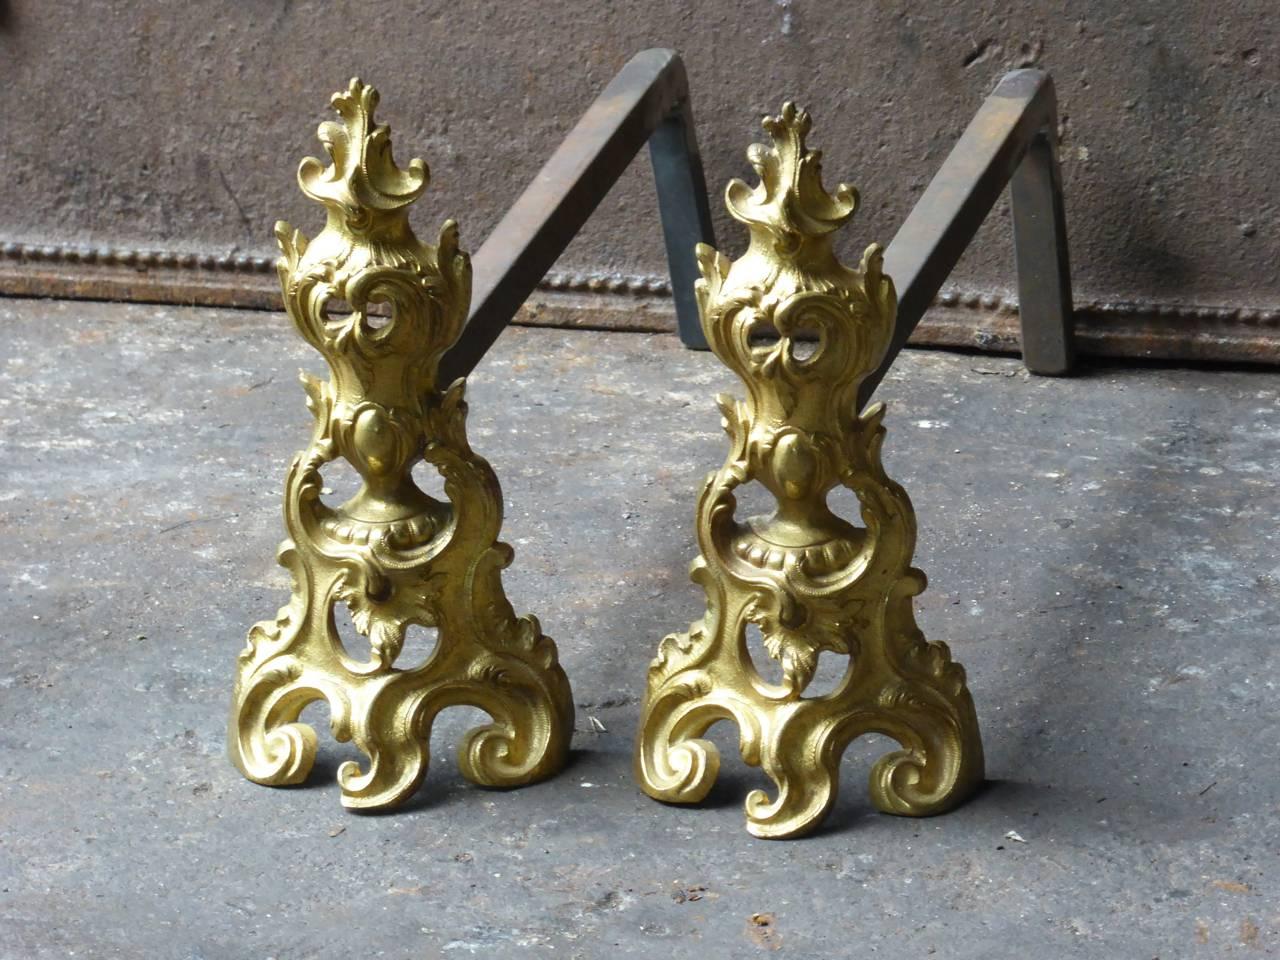 18th century French andirons made of ormolu and wrought iron. The andirons are made by Bouhon Frères. Bouhon Frères were prominent French producers of fireplace tools. The firm participated in the 1878 and 1900 Paris Expositions Universelles.

One